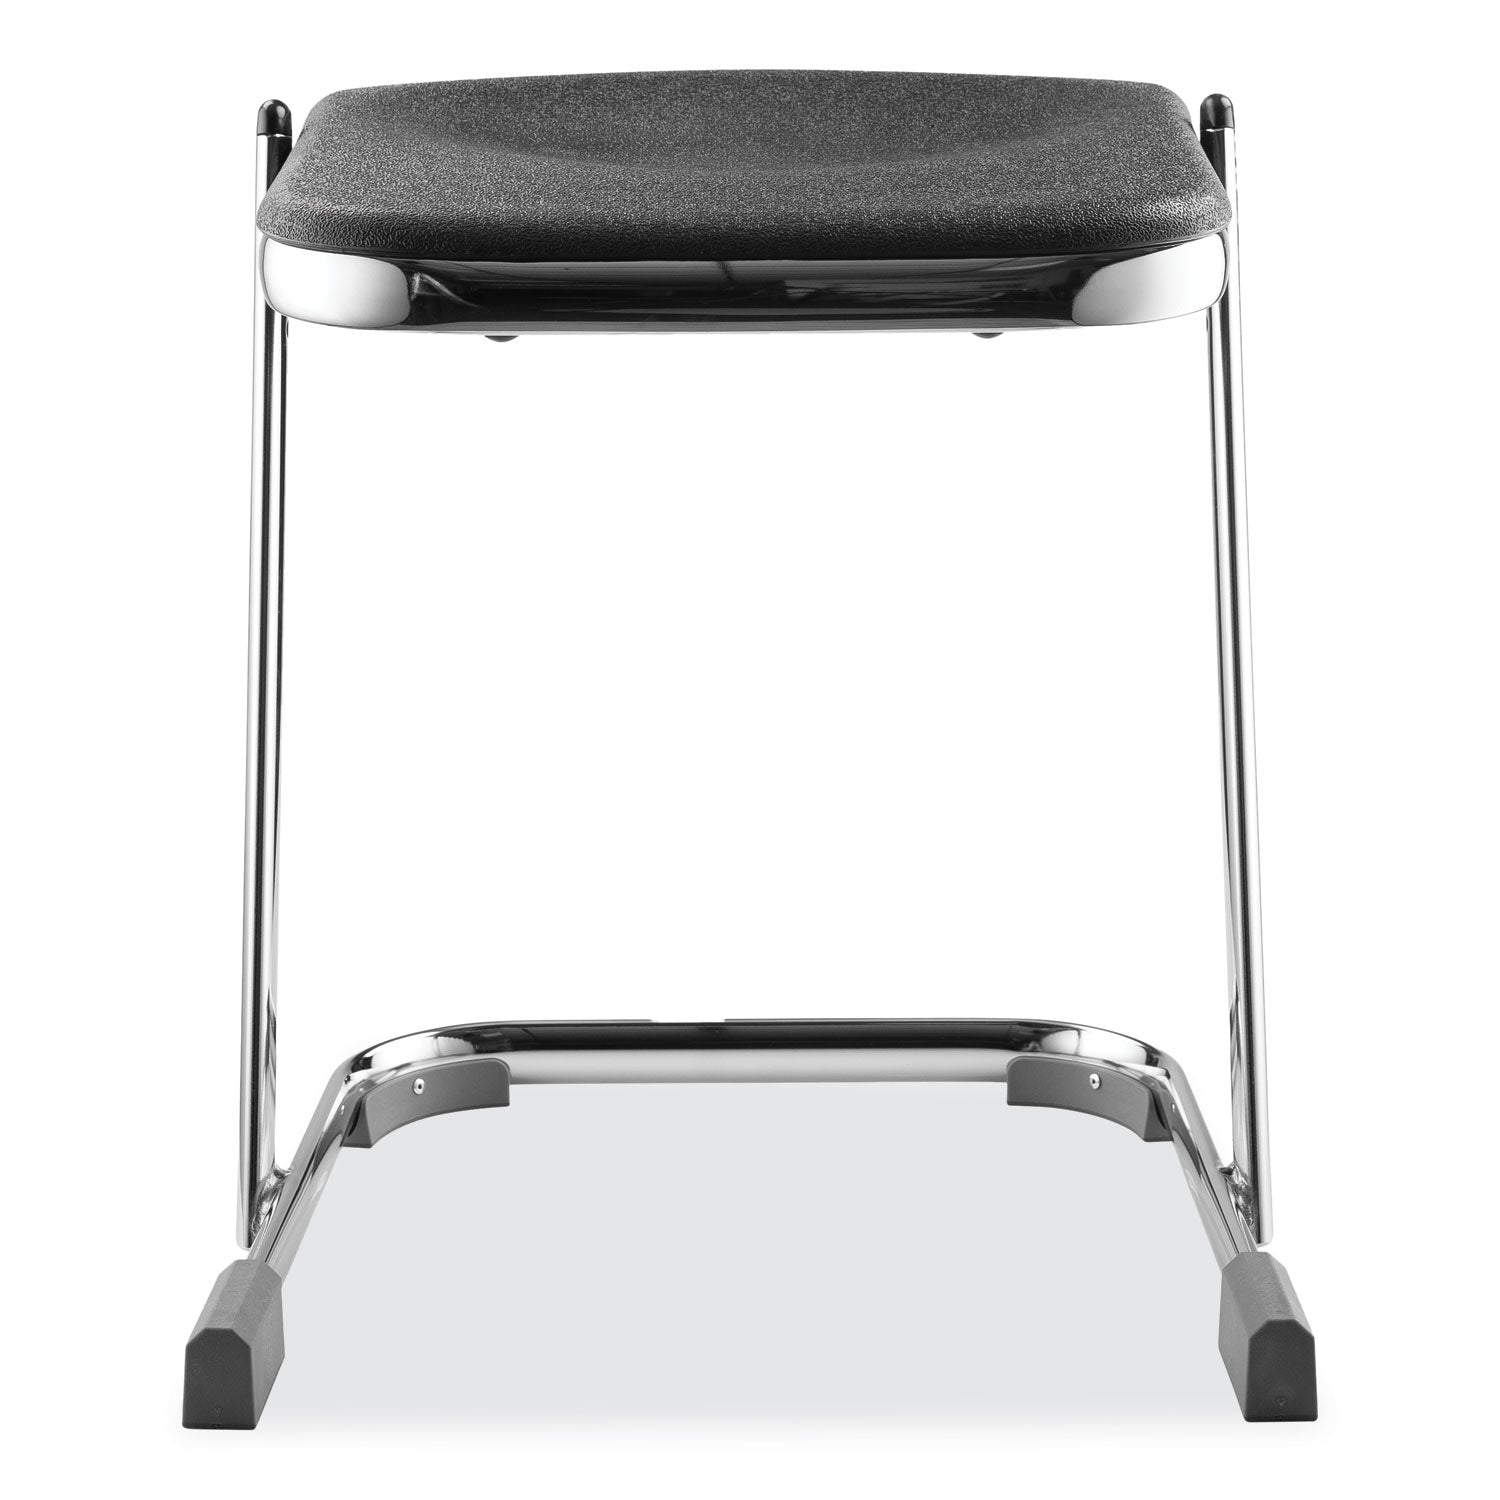 6600-series-elephant-z-stool-backless-supports-up-to-500lb-18-seat-height-black-seat-chrome-frameships-in-1-3-bus-days_nps6618 - 2